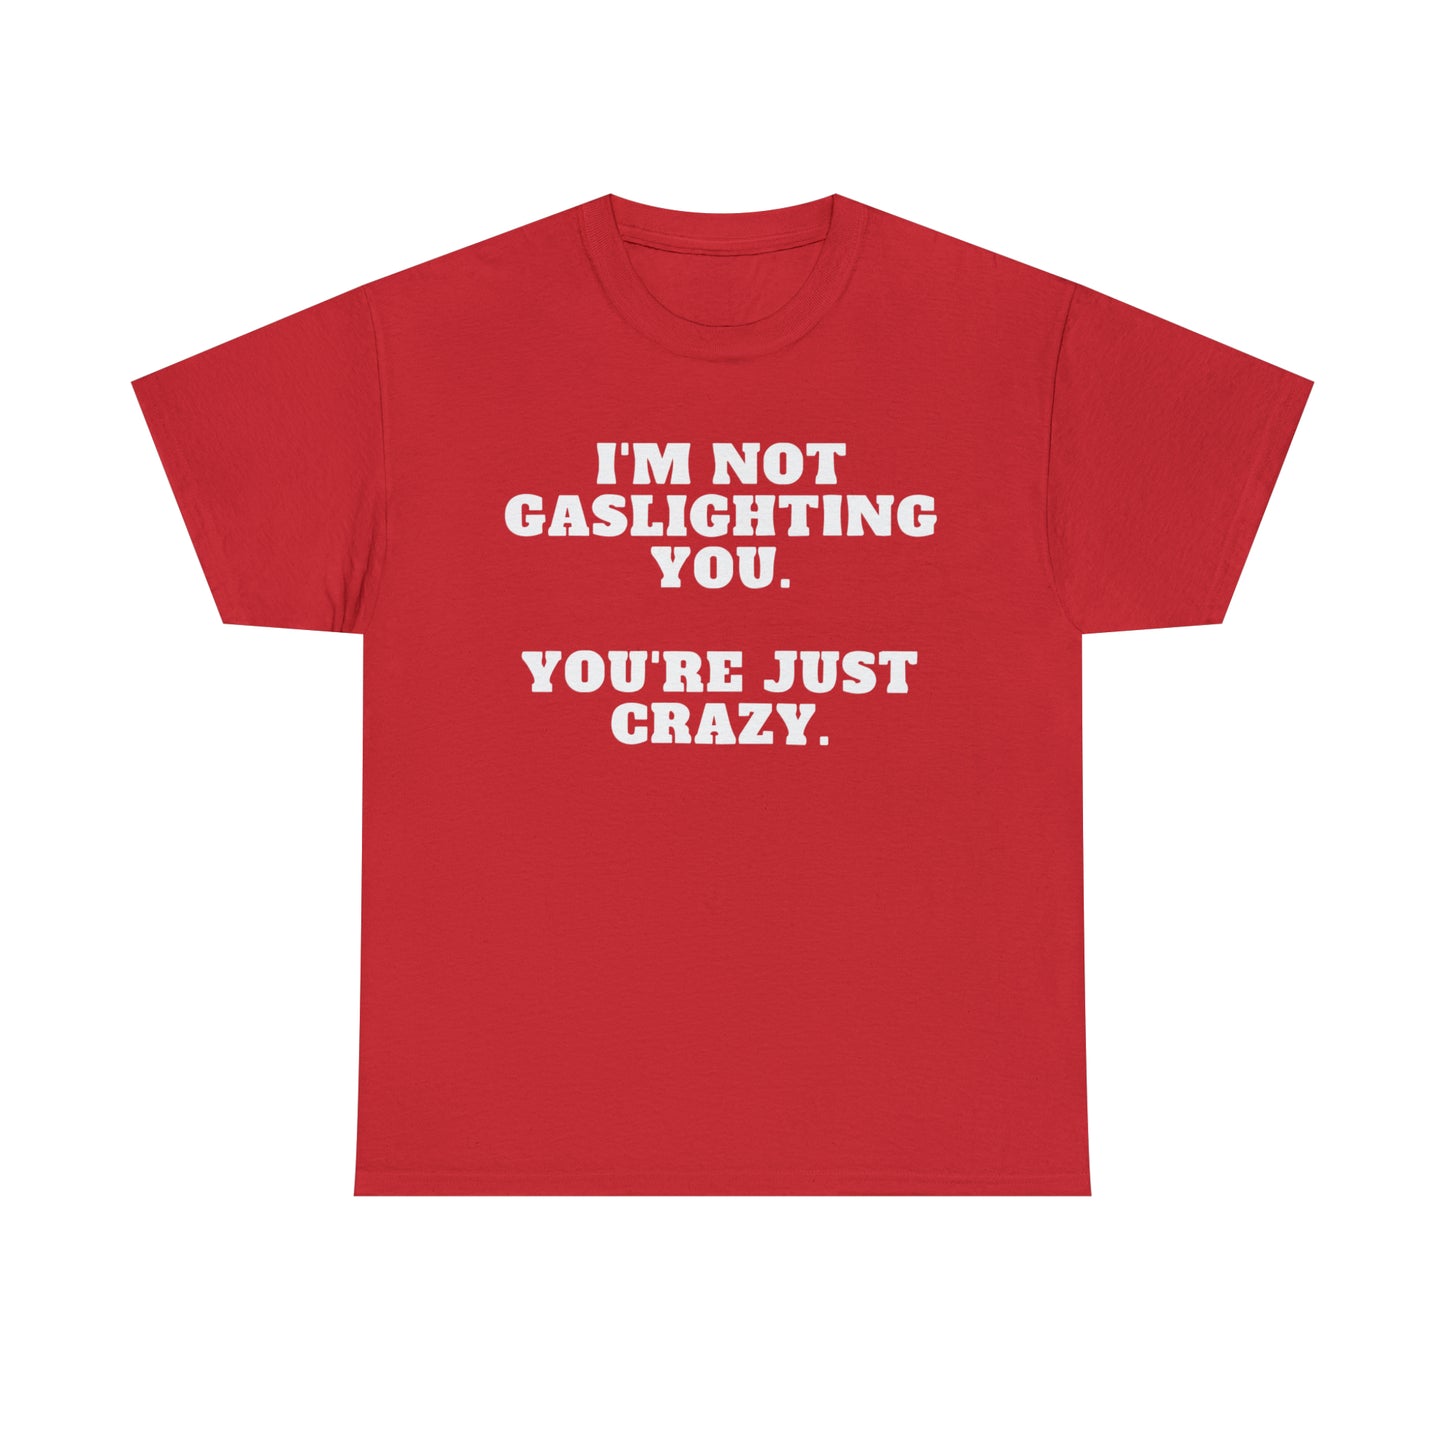 "I'm Not Gaslighting You. You're Just Crazy." Tee